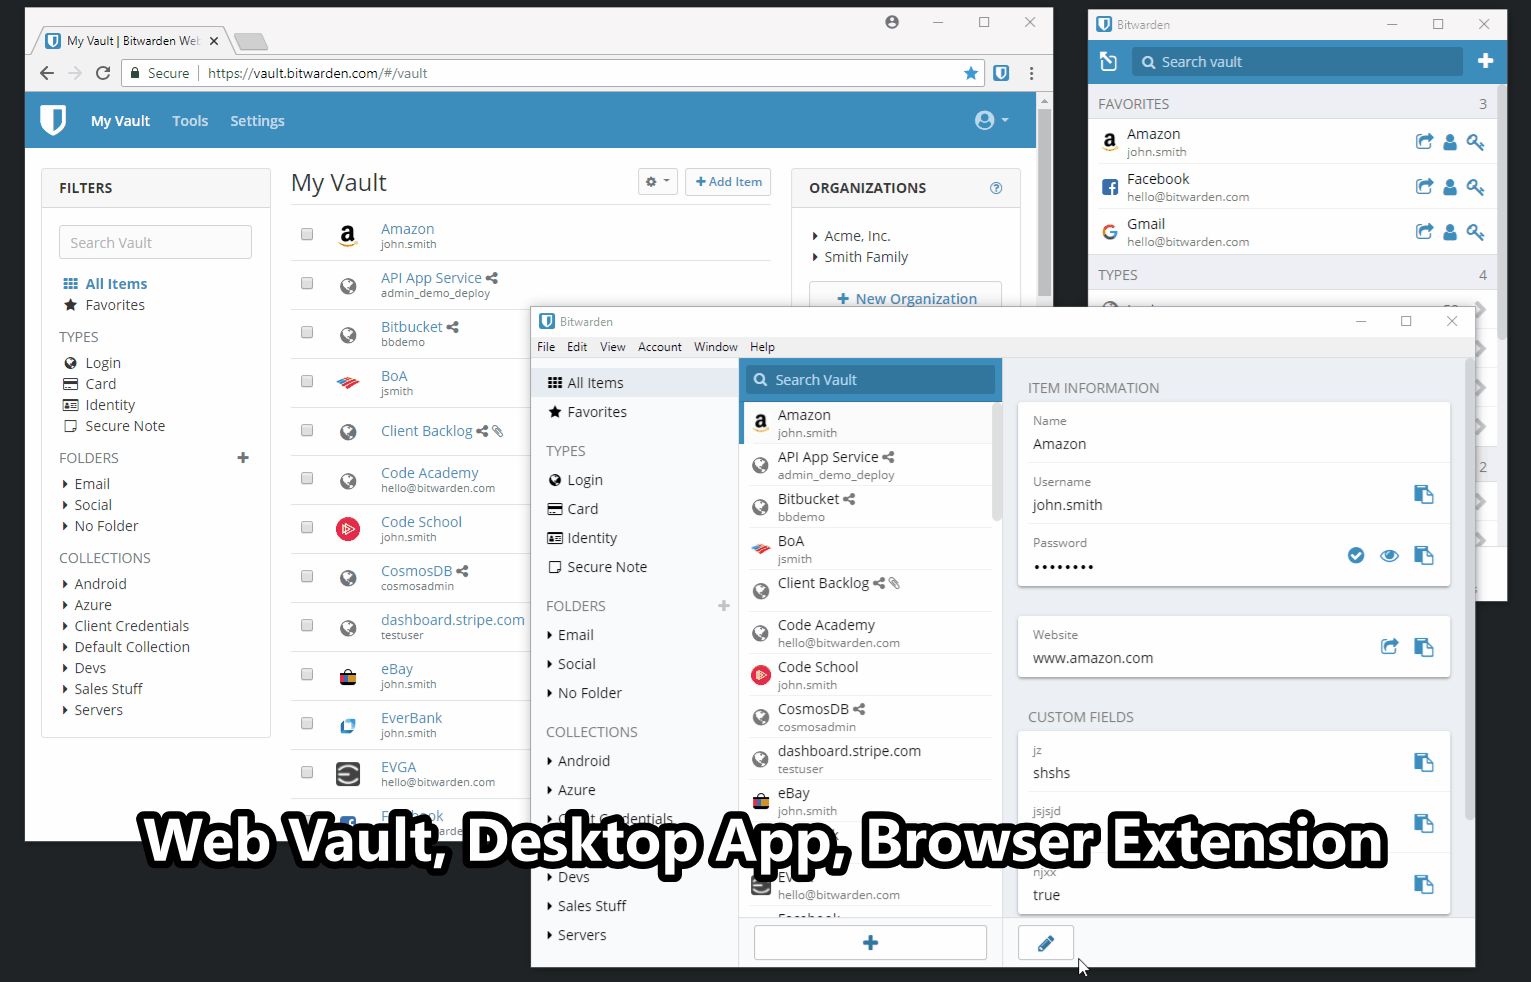 Live syncing a change from the desktop app to the web vault and browser extension